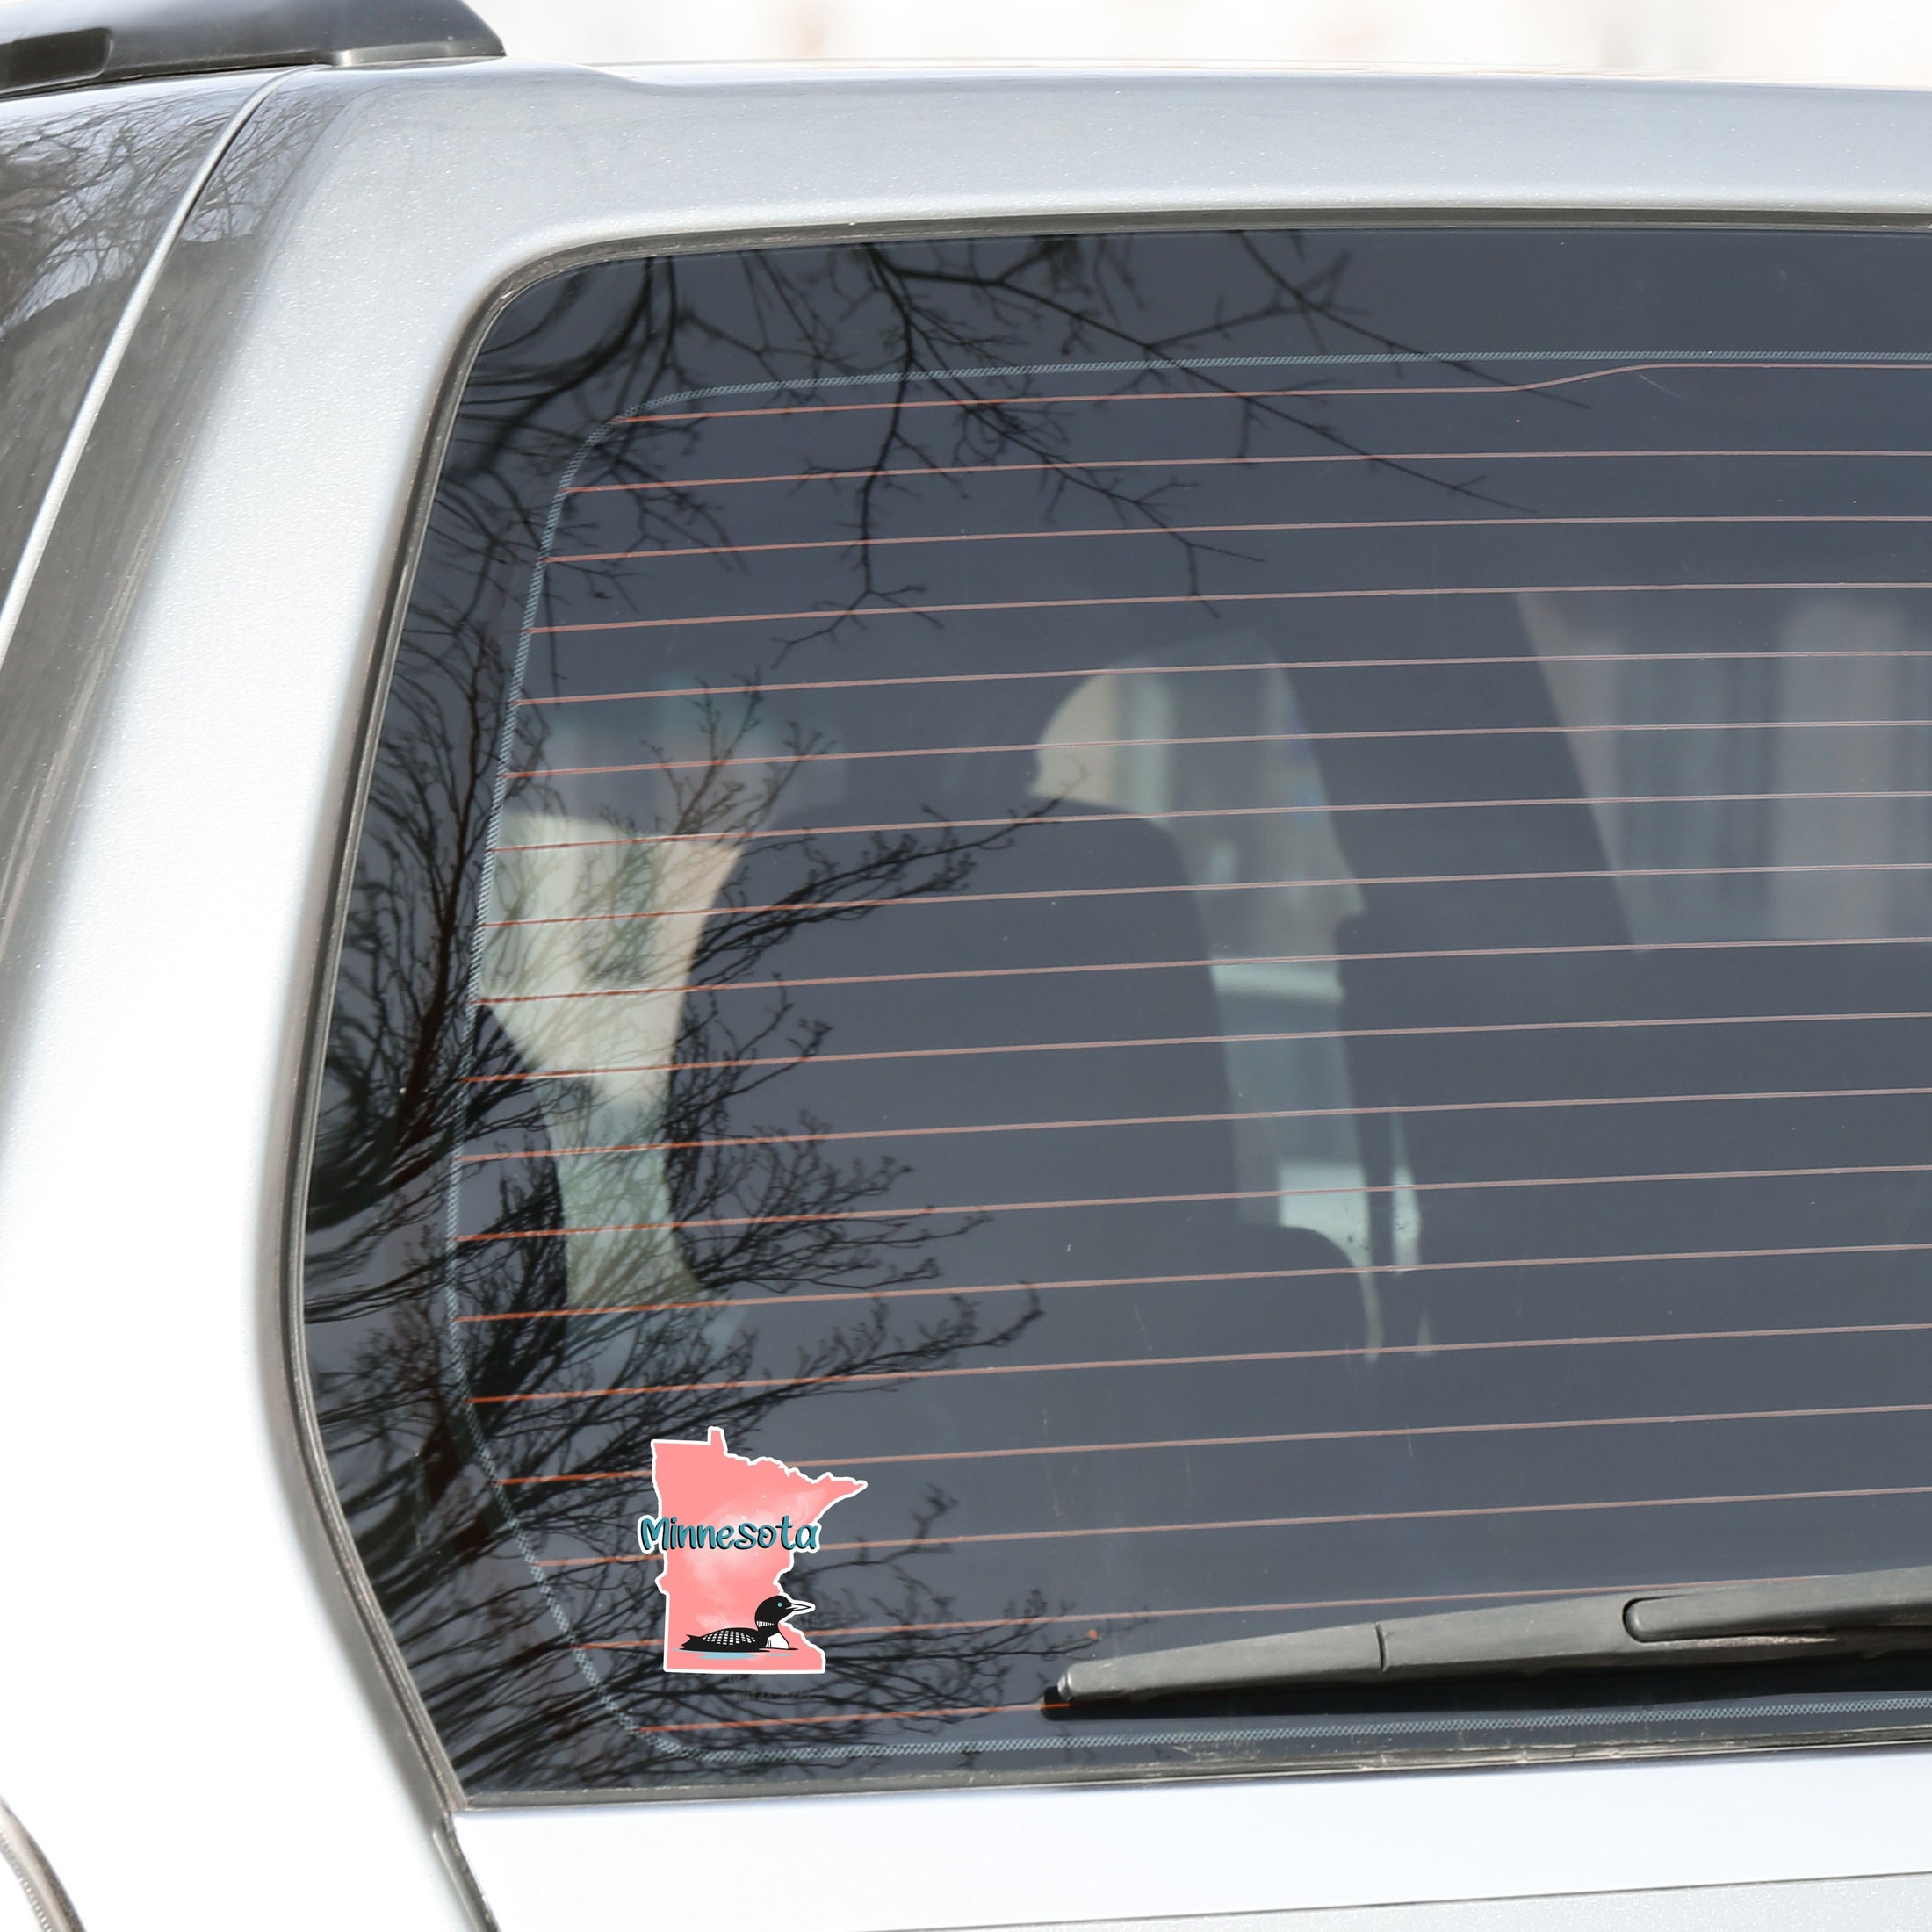 This image shows the MN with loon sticker on the back window of a car.